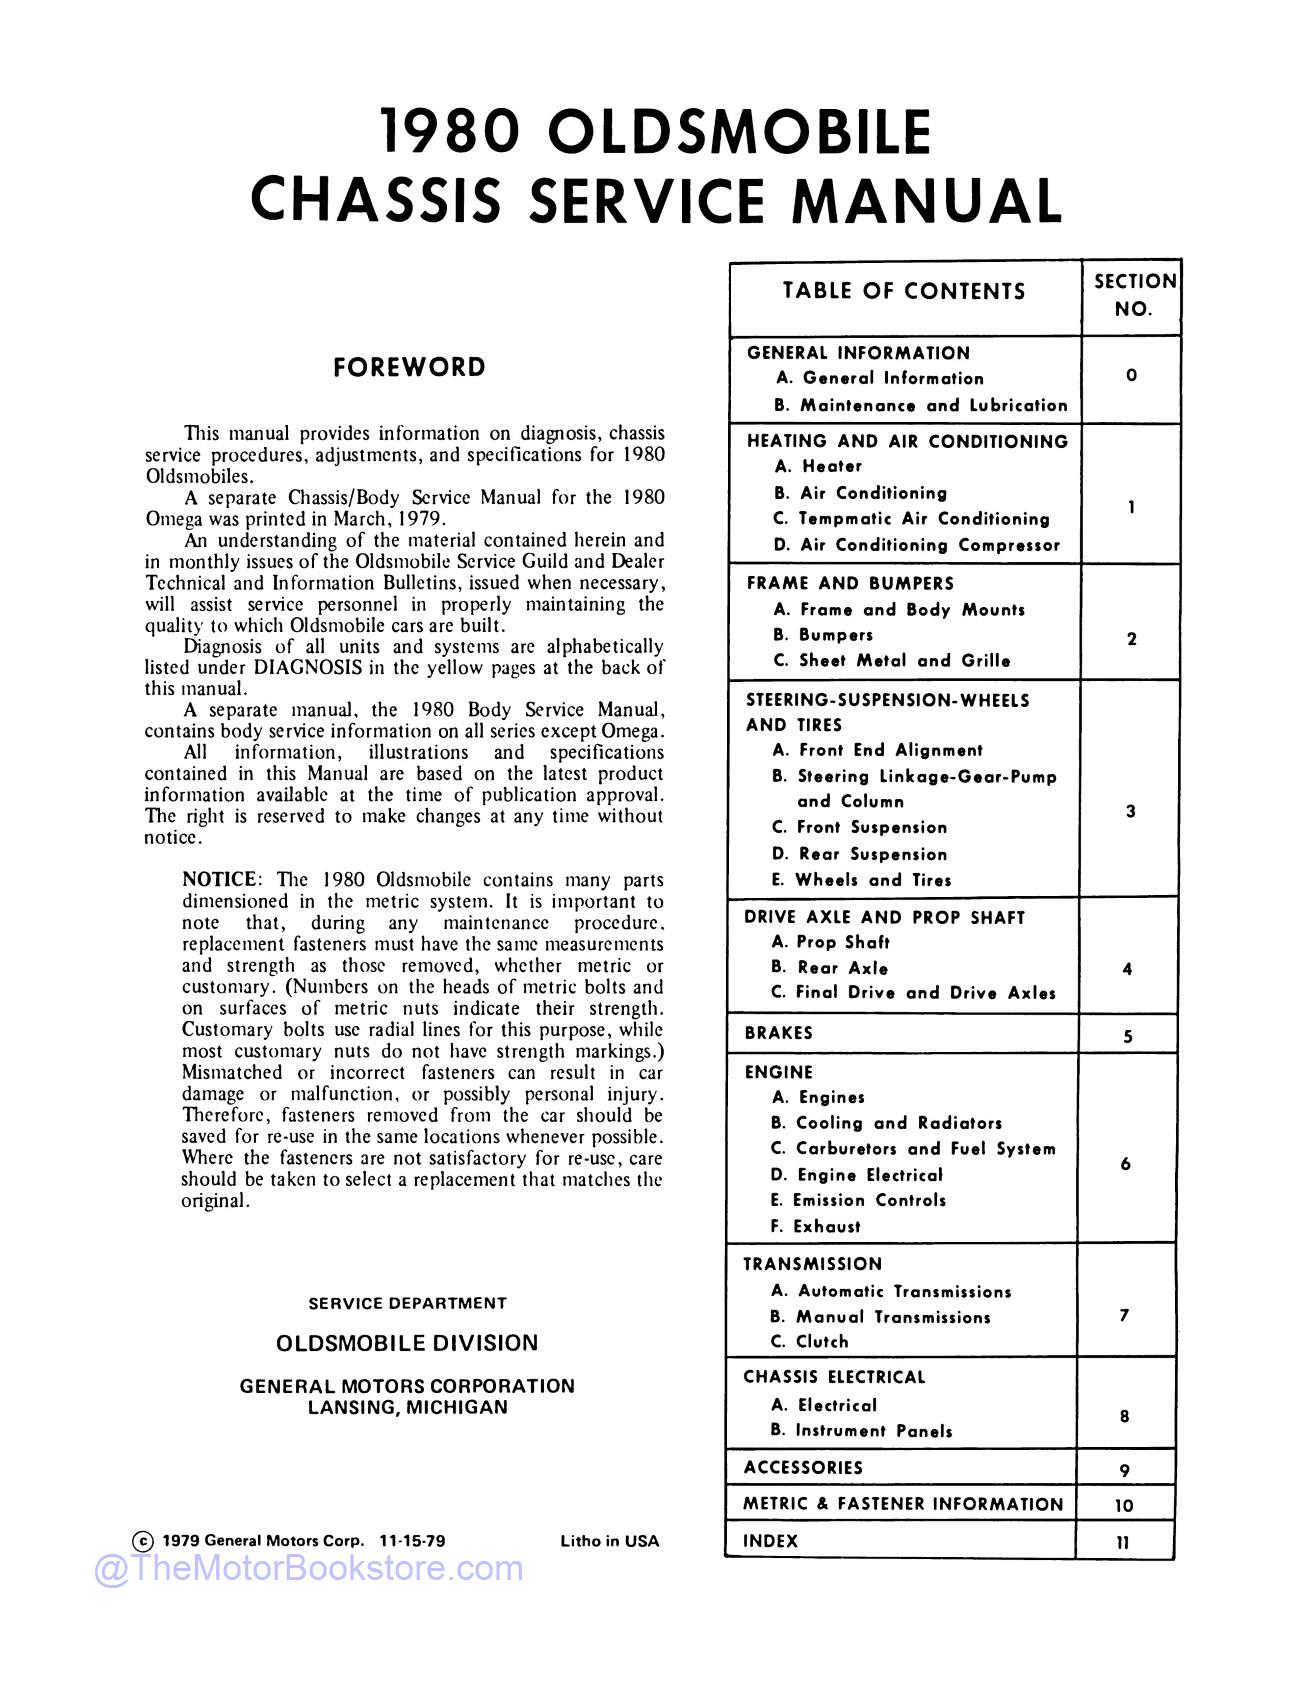 1980 Oldsmobile Service Repair Manual  - Table of Contents